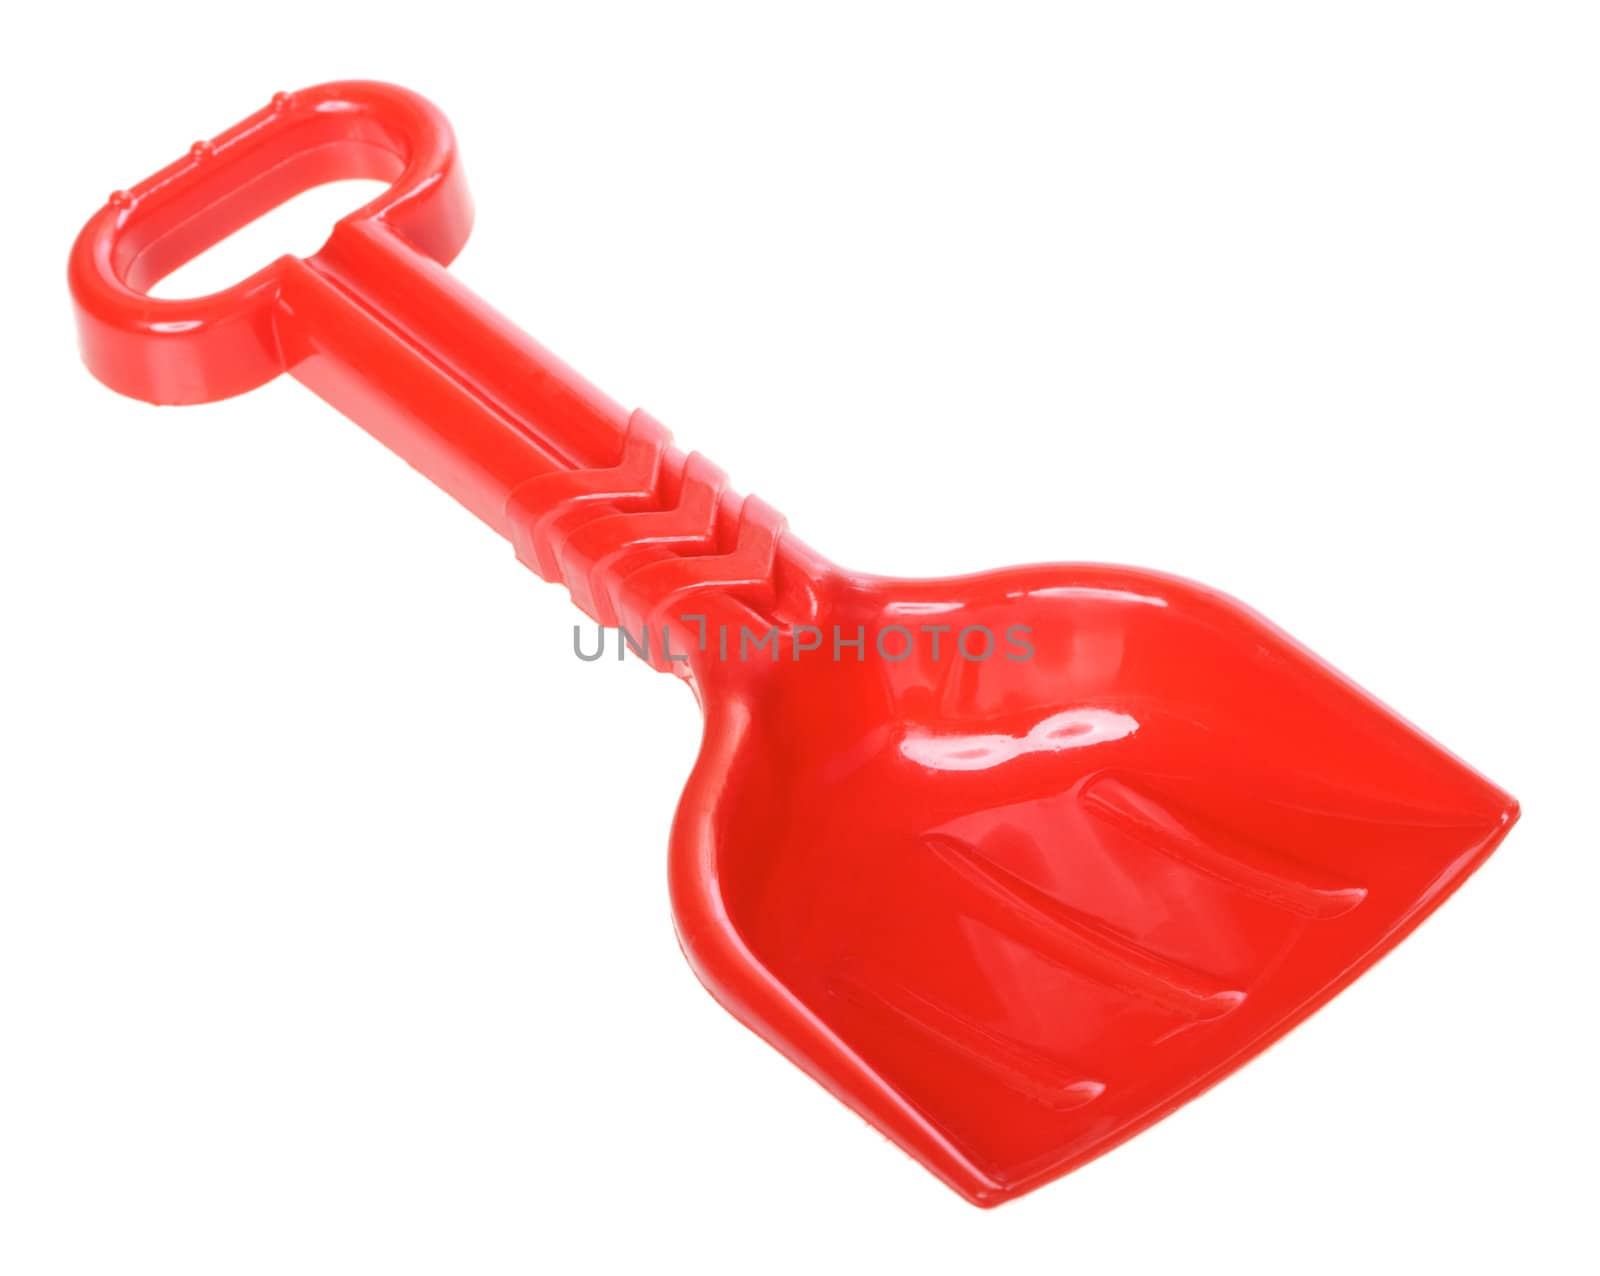 red toy scoop, isolated on white background